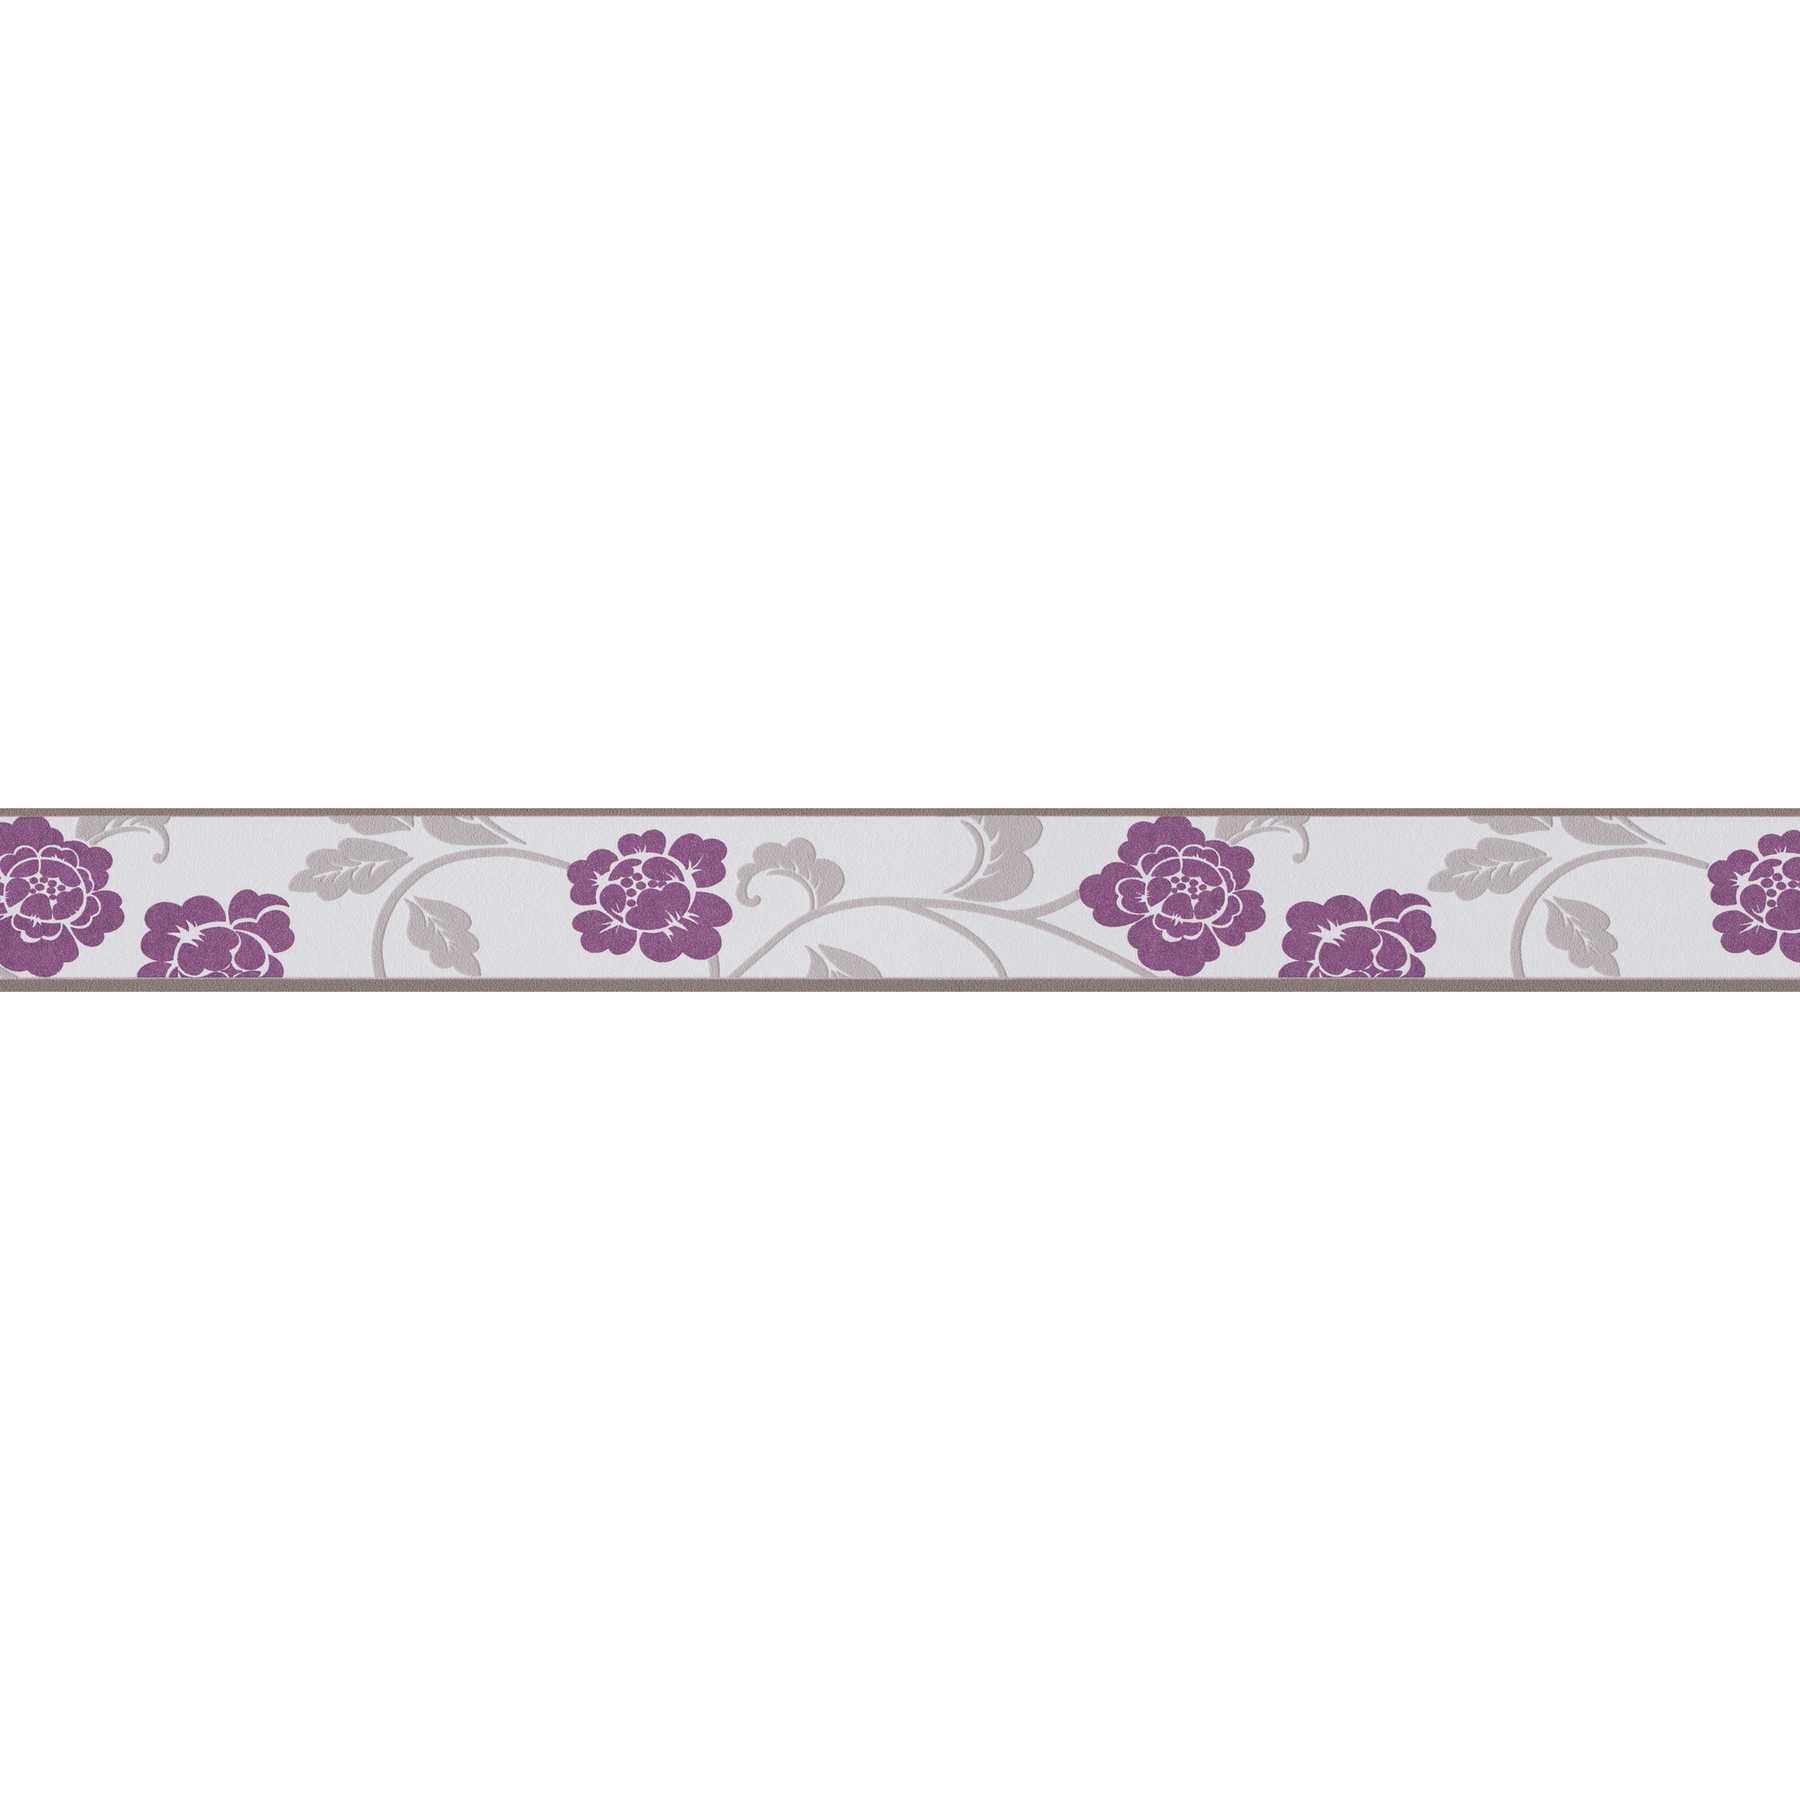         Border with flowers and leaves tendrils with texture pattern - purple, grey
    